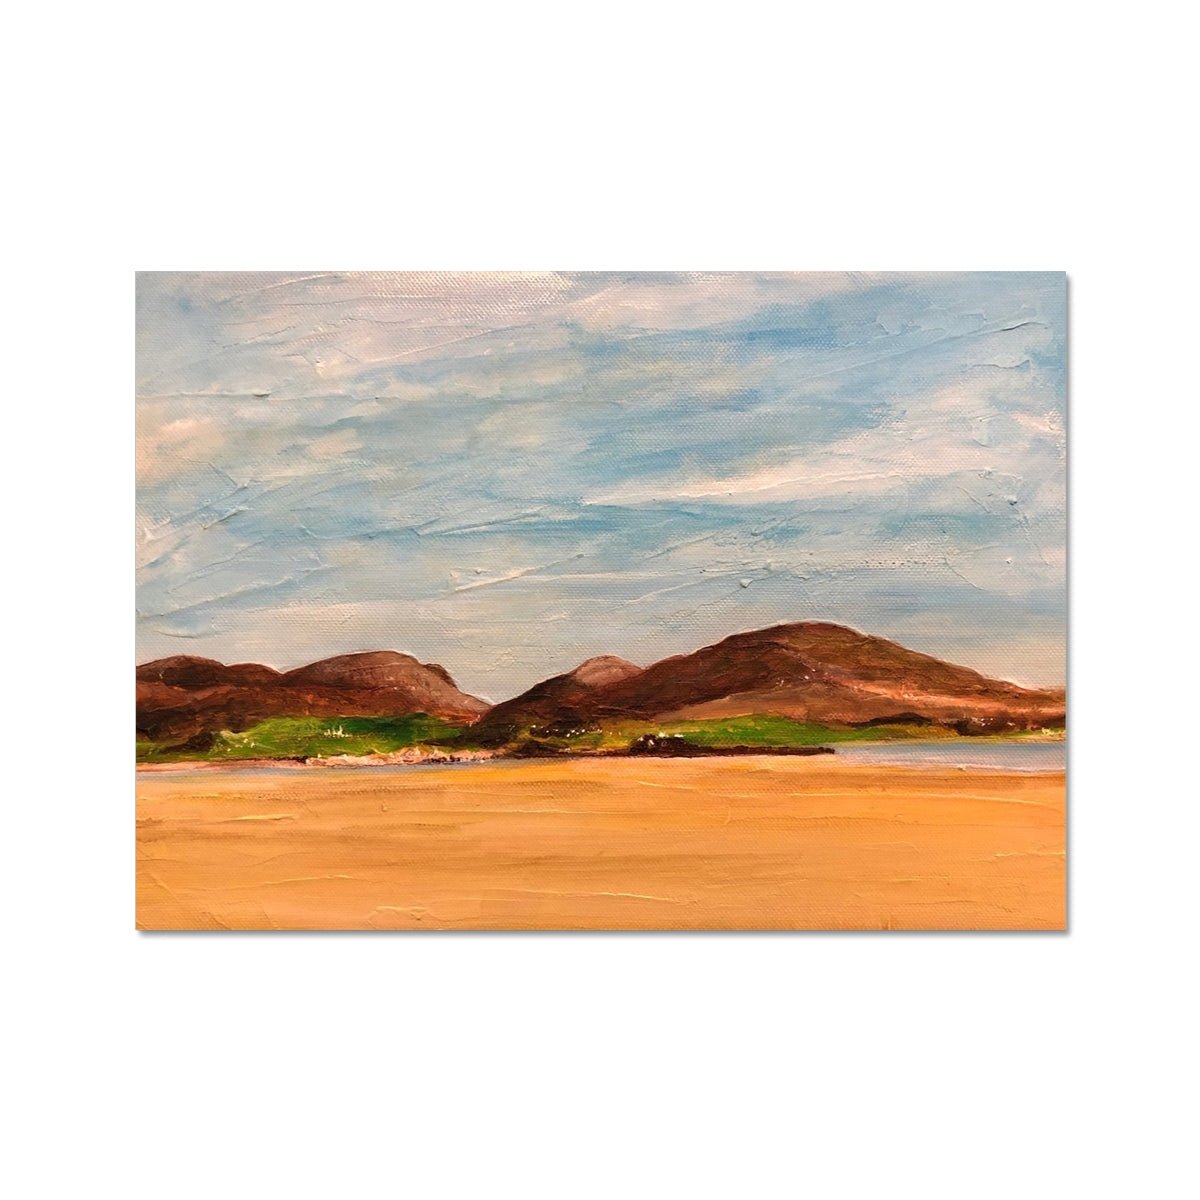 Uig Sands Lewis Painting | Fine Art Prints From Scotland-Unframed Prints-Hebridean Islands Art Gallery-A4 Landscape-Paintings, Prints, Homeware, Art Gifts From Scotland By Scottish Artist Kevin Hunter